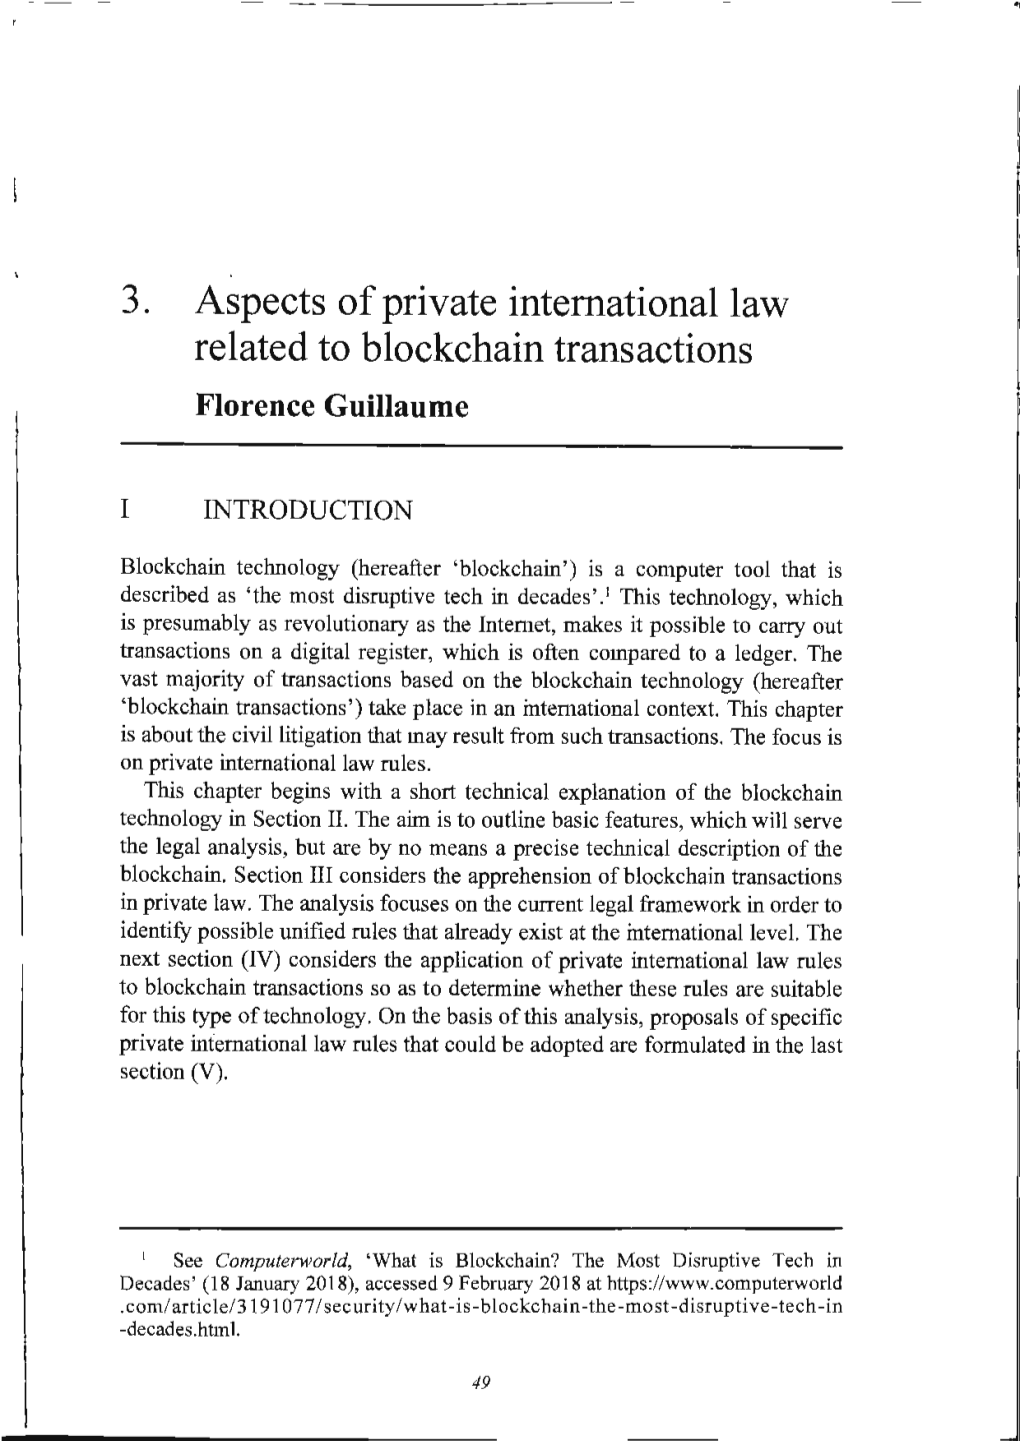 3. Aspects of Private International Law Related to Blockchain Transactions Florence Guillaume